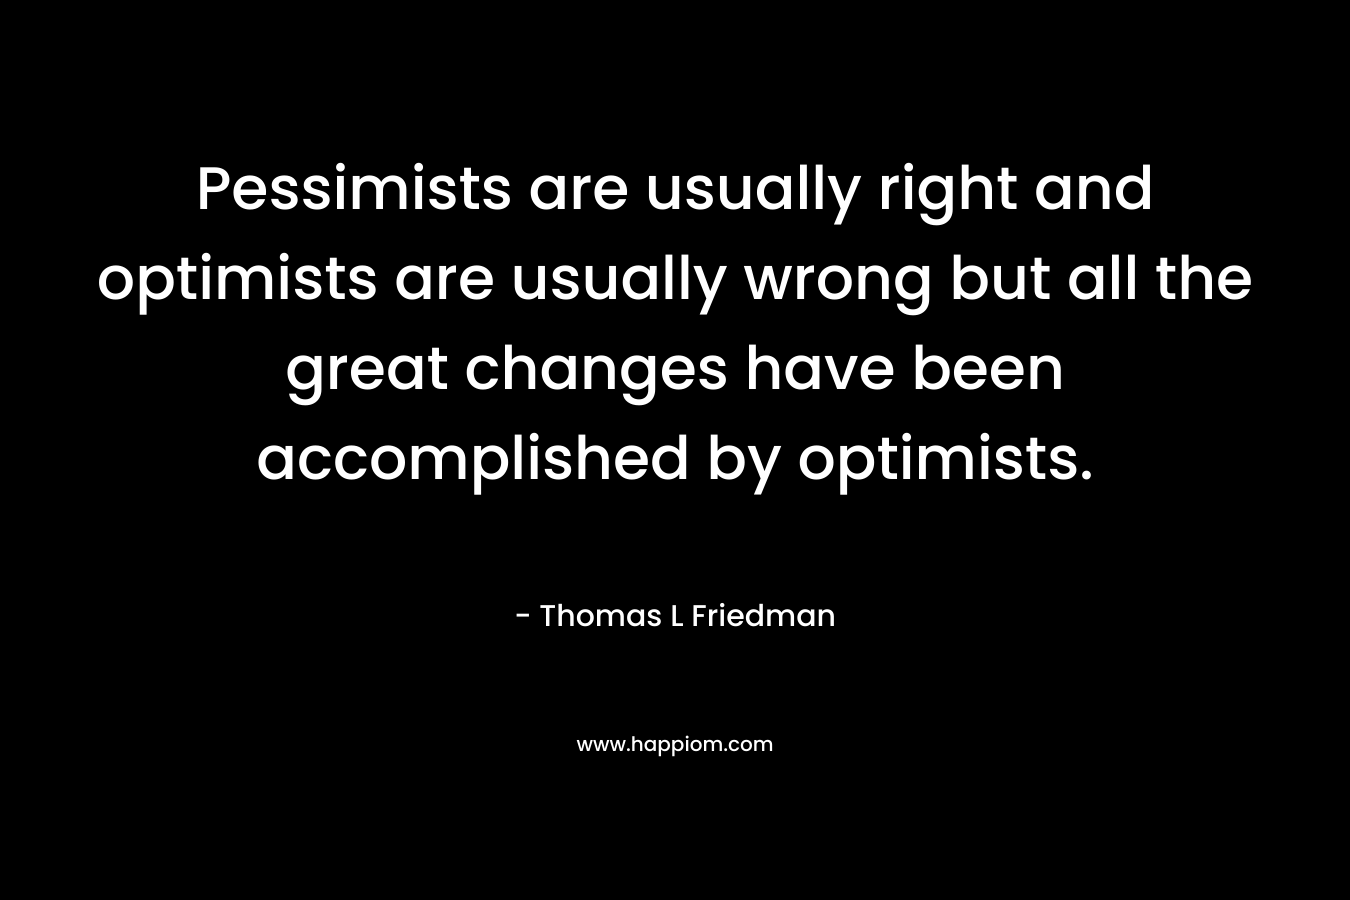 Pessimists are usually right and optimists are usually wrong but all the great changes have been accomplished by optimists. – Thomas L Friedman